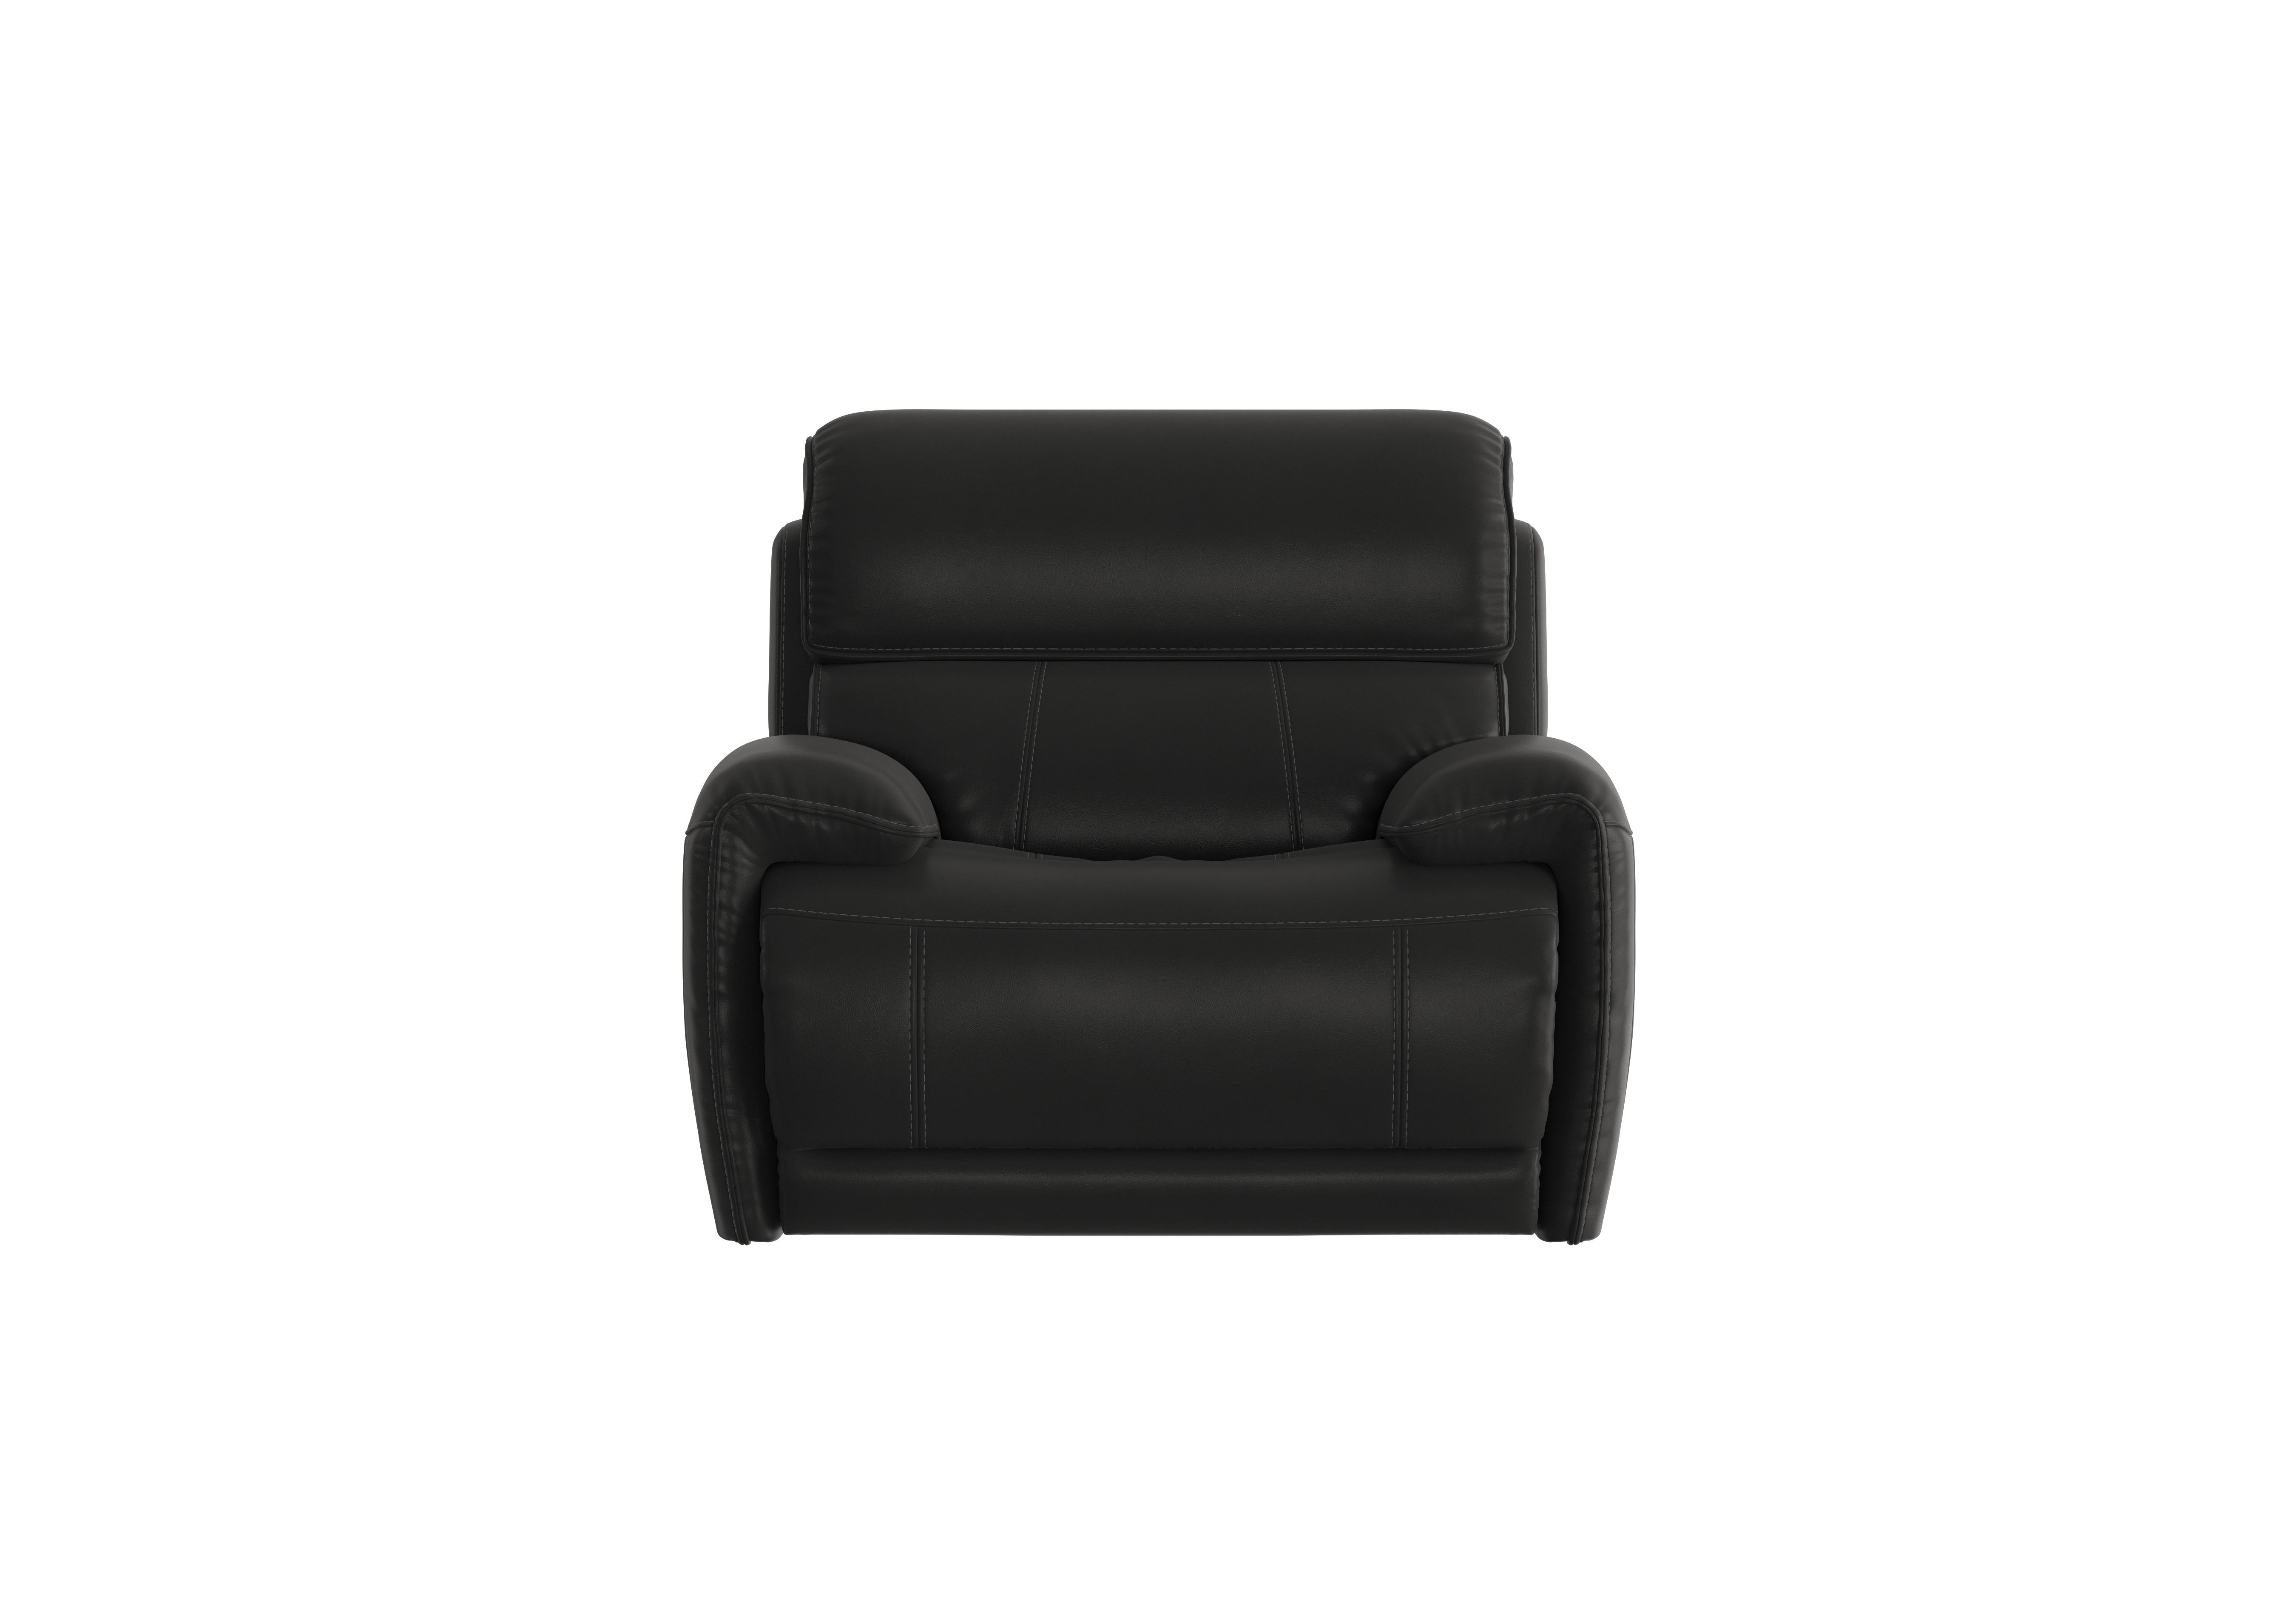 Link Leather Power Recliner Armchair with Power Headrest in Bv-3500 Classic Black on Furniture Village